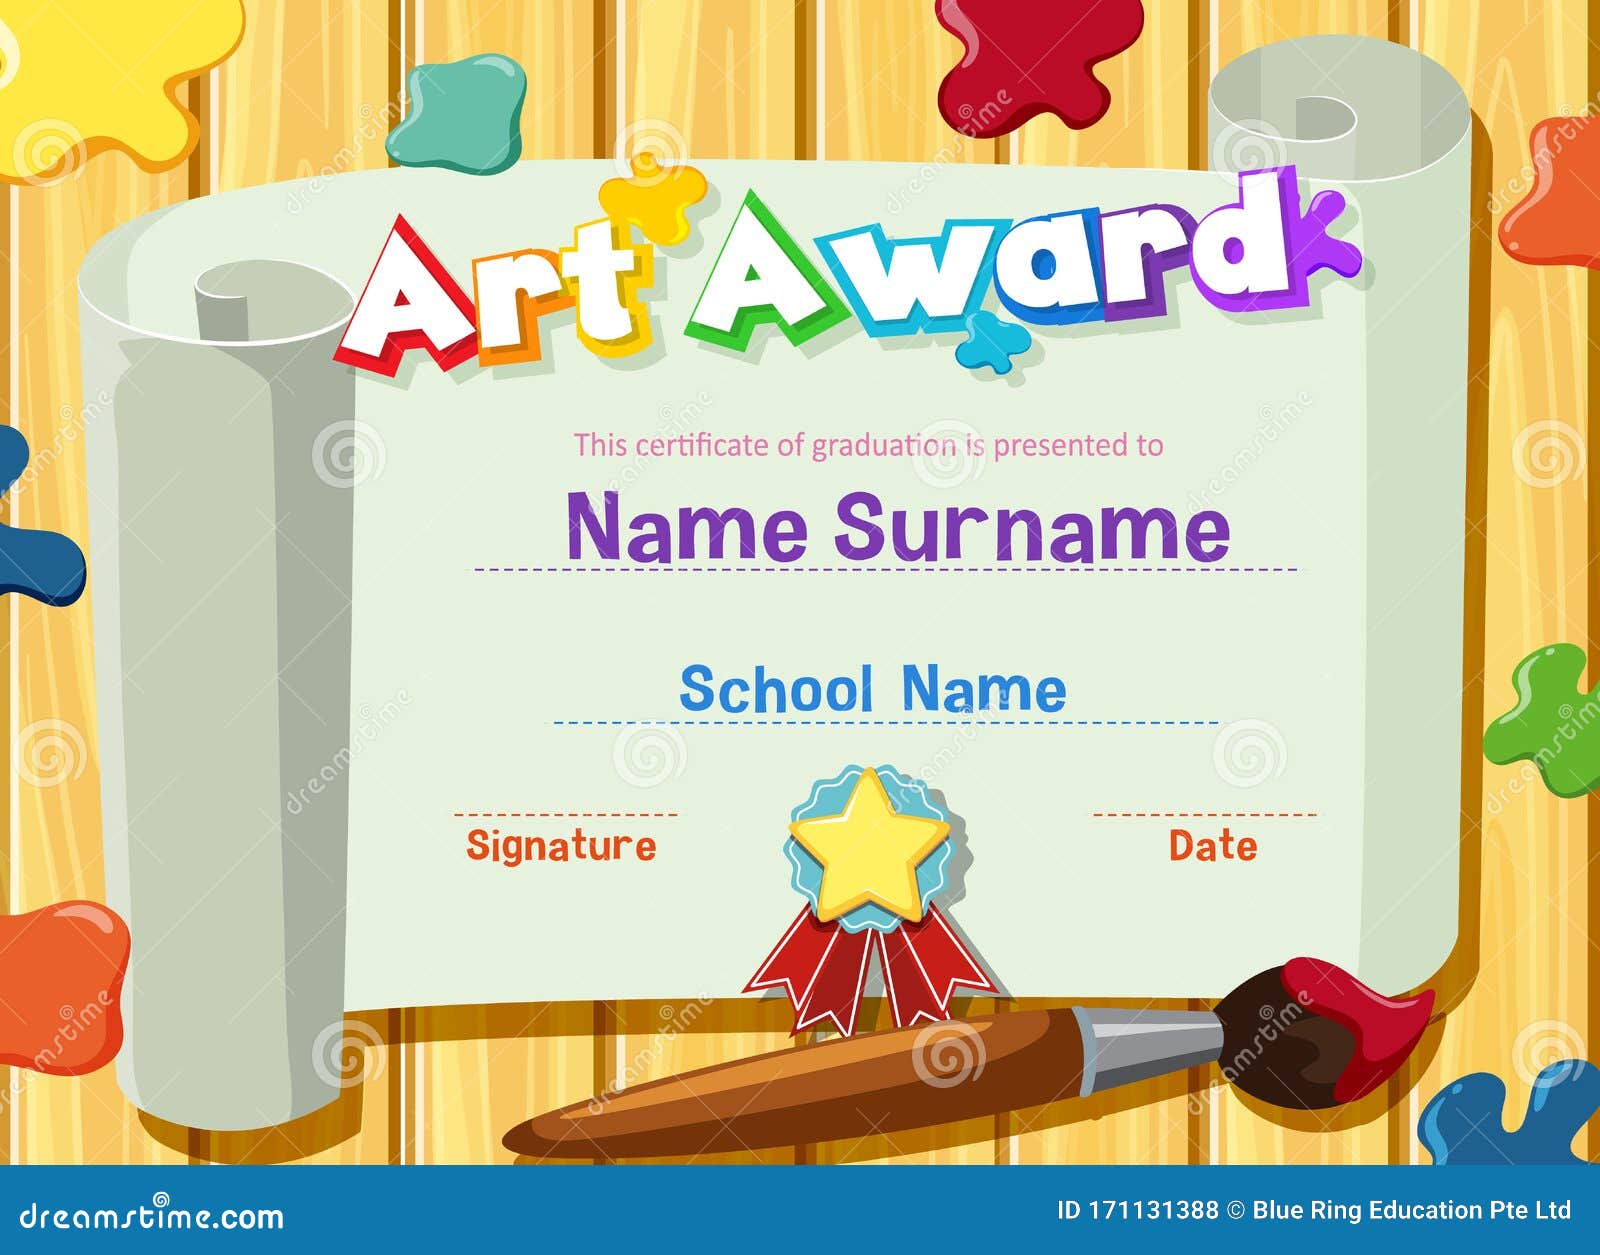 Certificate Template For Art Award With Paints And Paintbrush In With Regard To Art Certificate Template Free